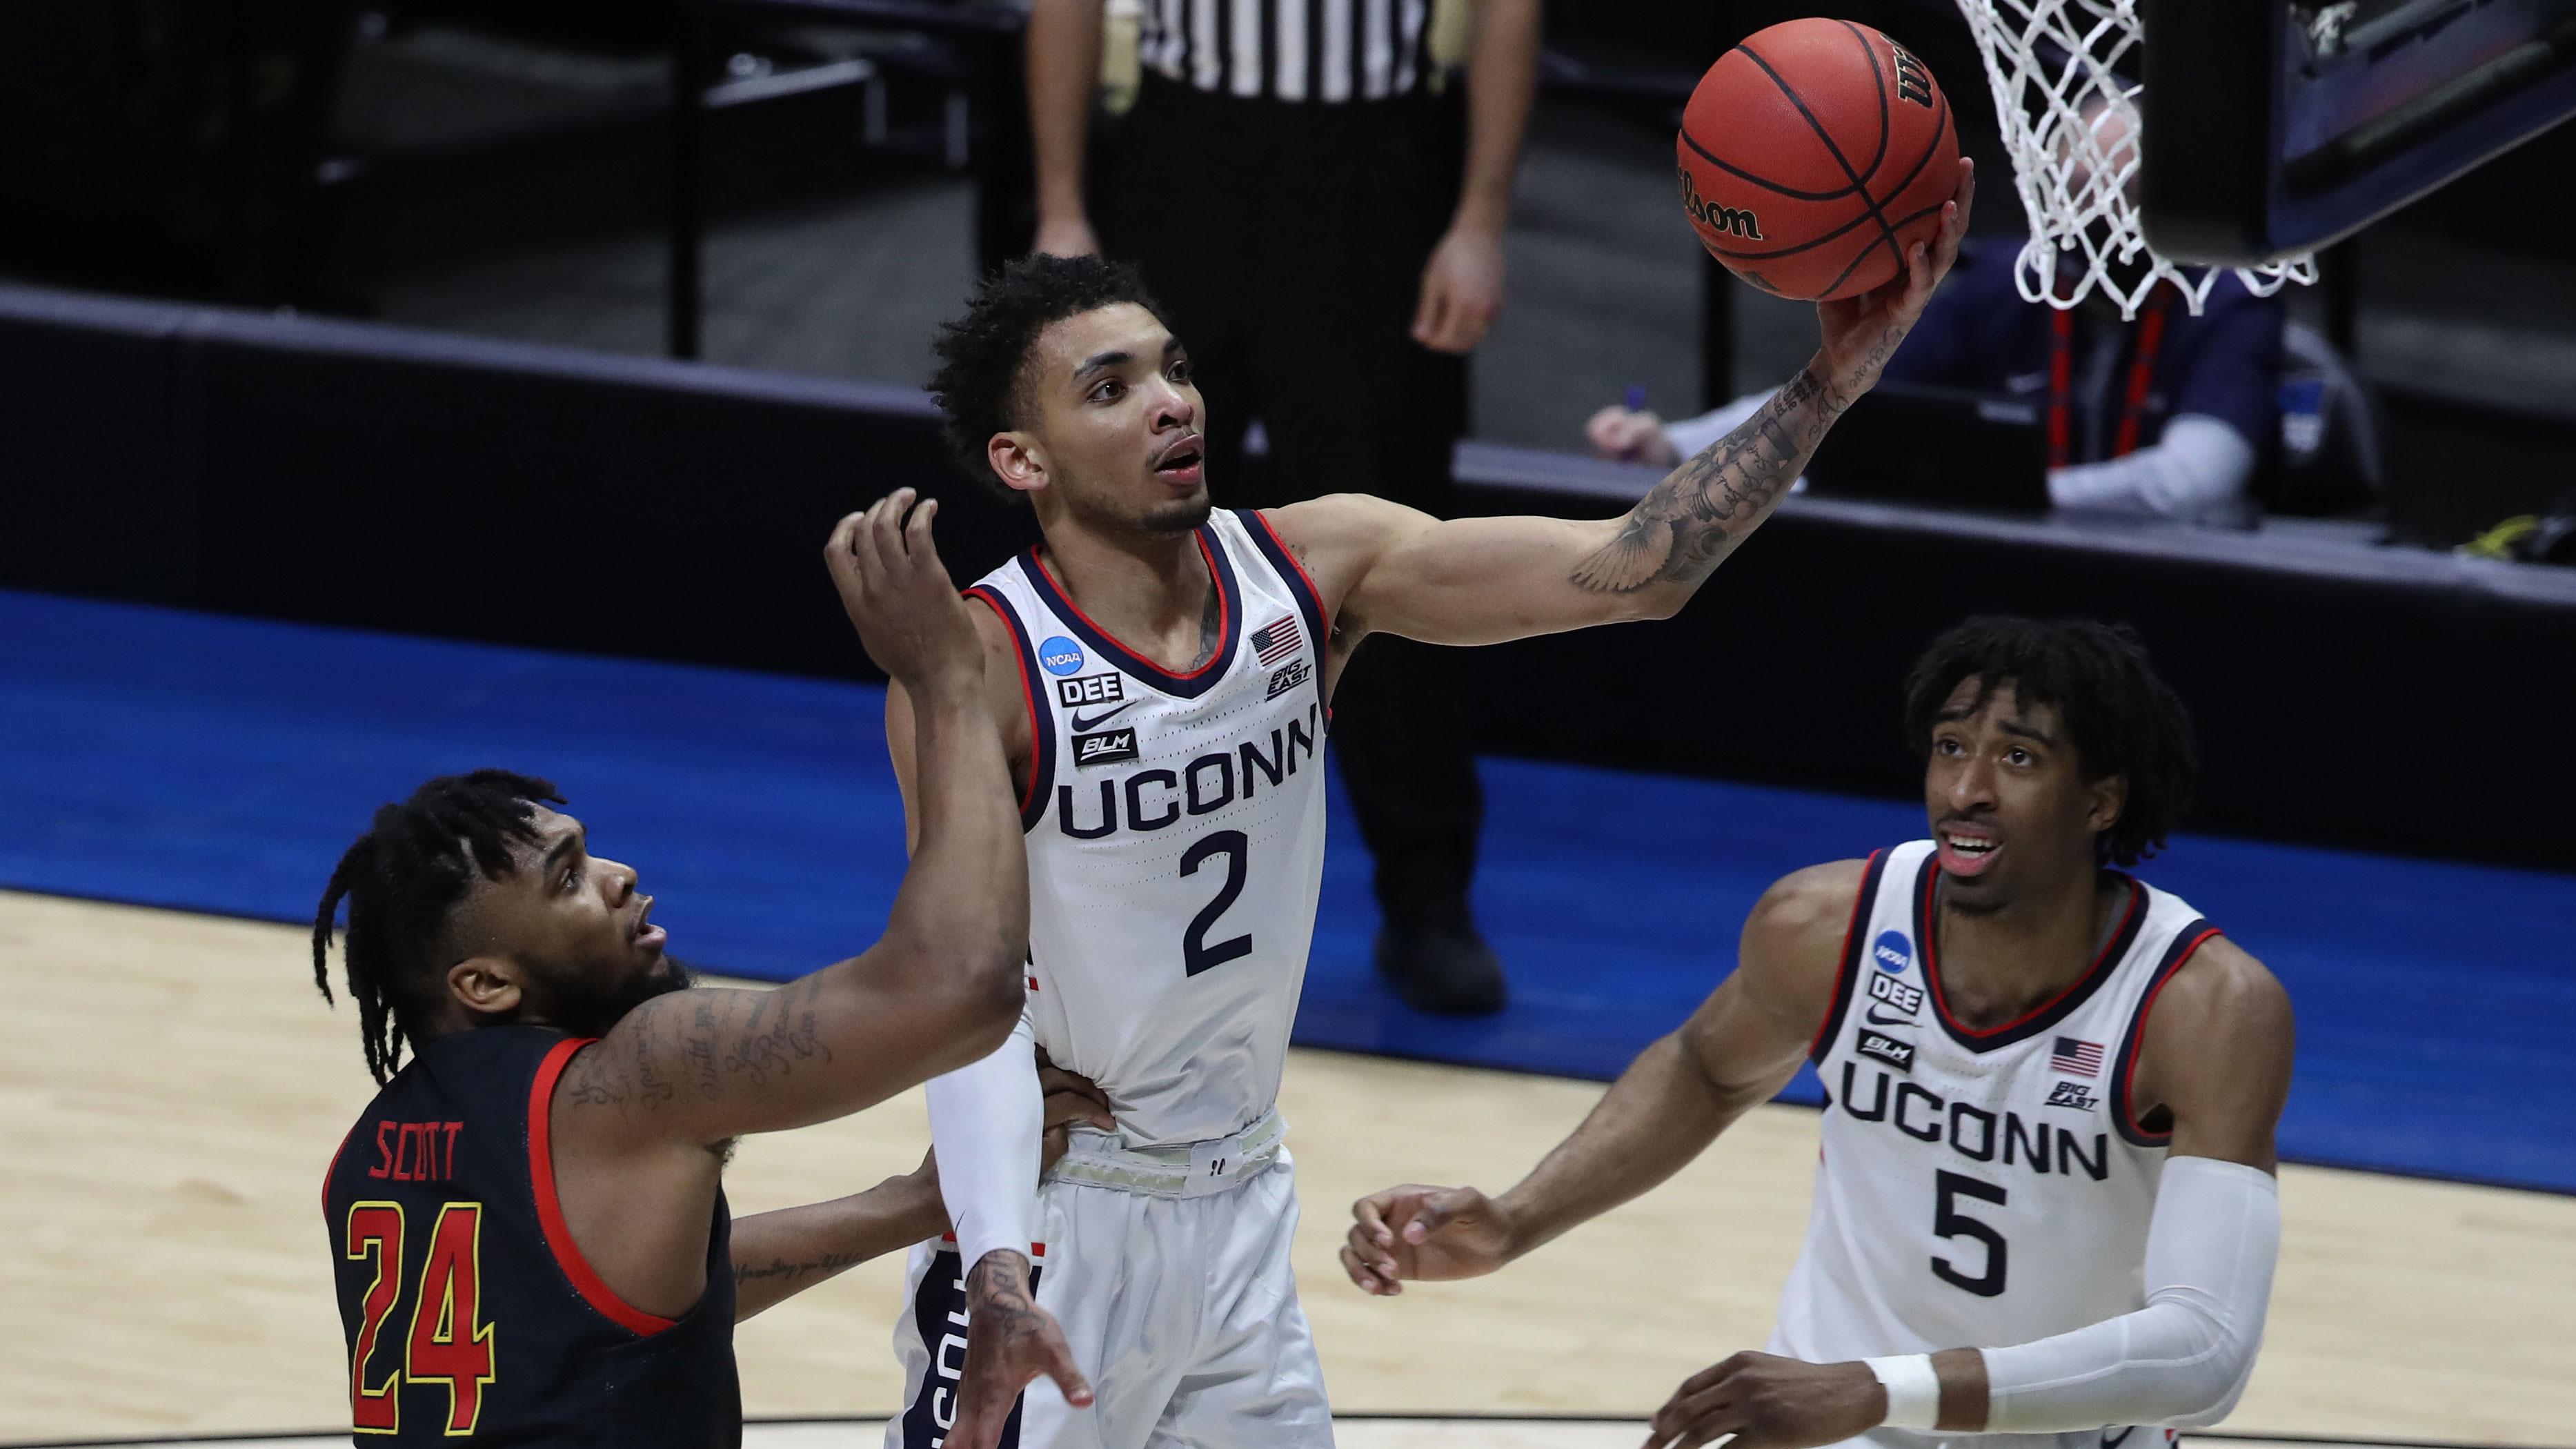 Mar 20, 2021; West Lafayette, Indiana, USA; Connecticut Huskies guard James Bouknight (2) shoots the ball over Maryland Terrapins forward Donta Scott (24) as Connecticut forward Isaiah Whaley (5) looks on during the second half in the first round of the 2021 NCAA Tournament at Mackey Arena. / Joshua Bickel-USA TODAY Sports